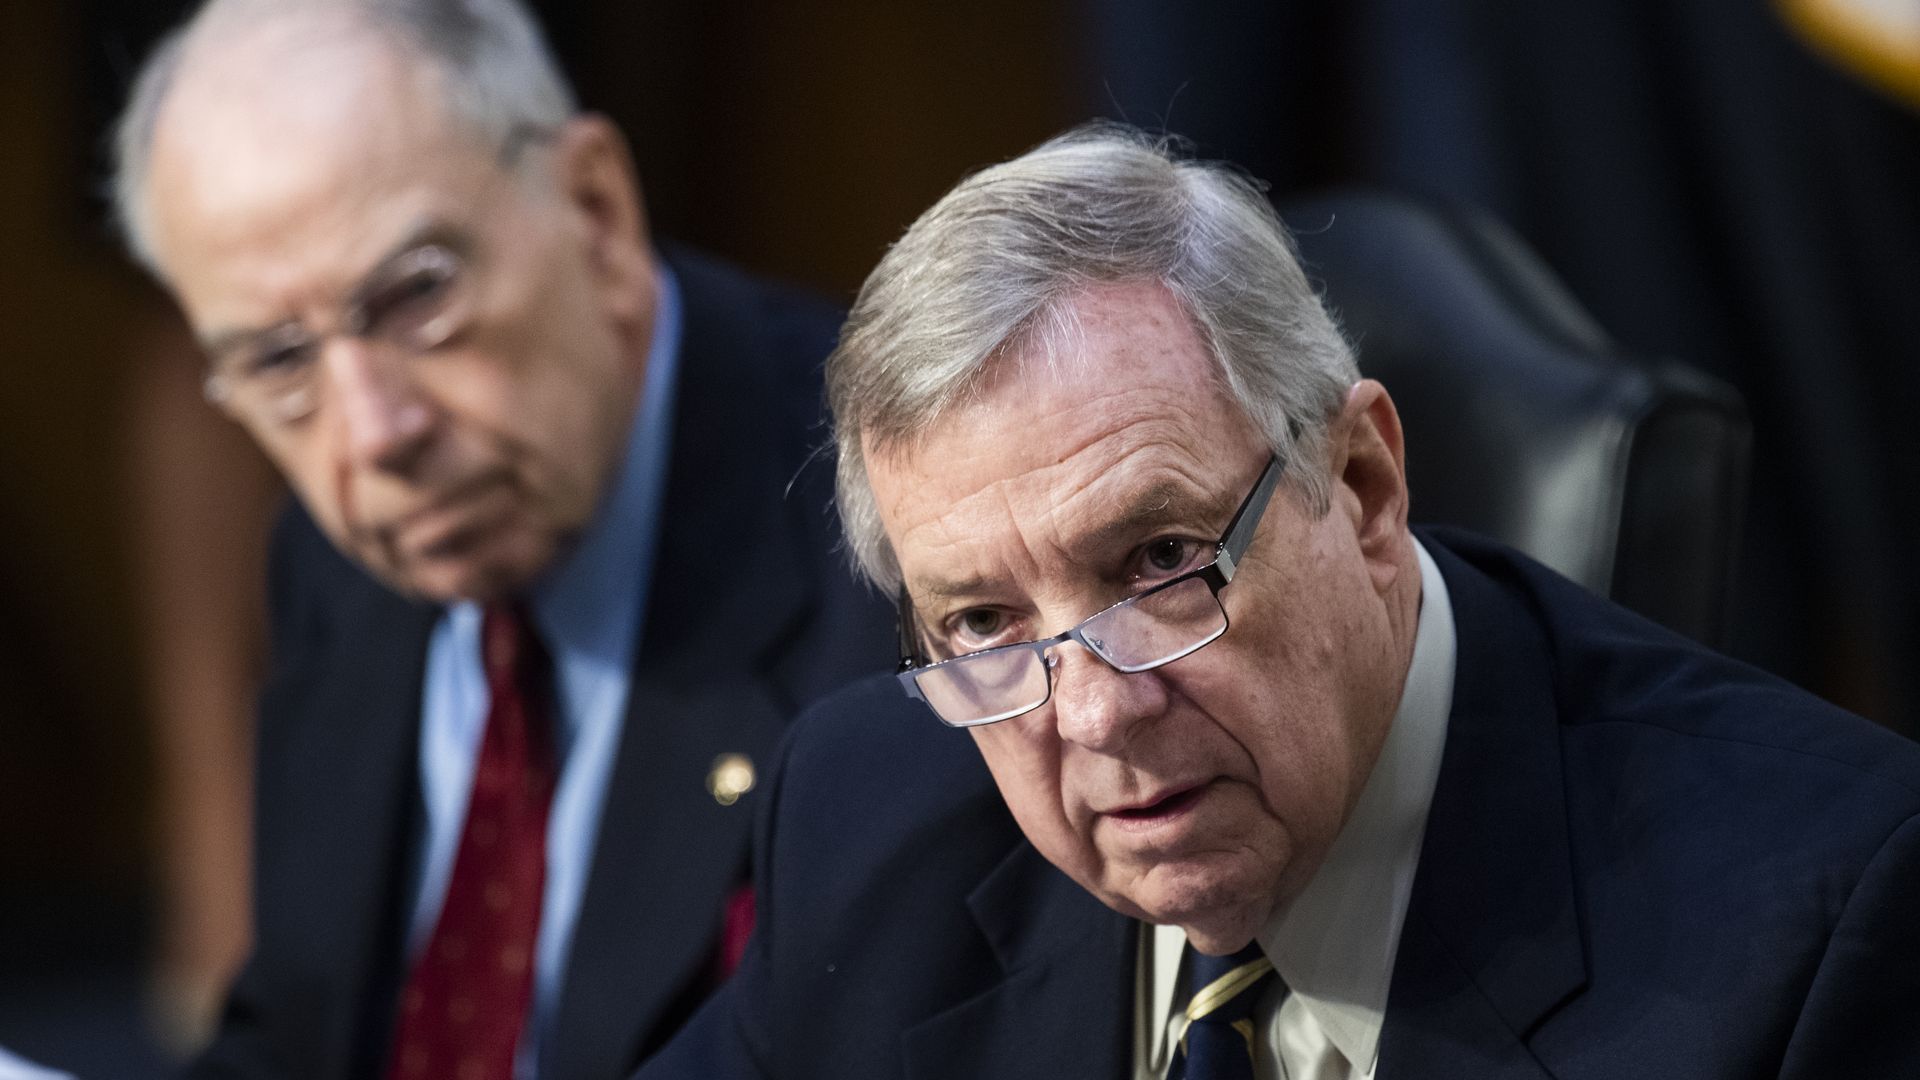 Sens. Chuck Grassley and Dick Durbin are seen during a congressional hearing.